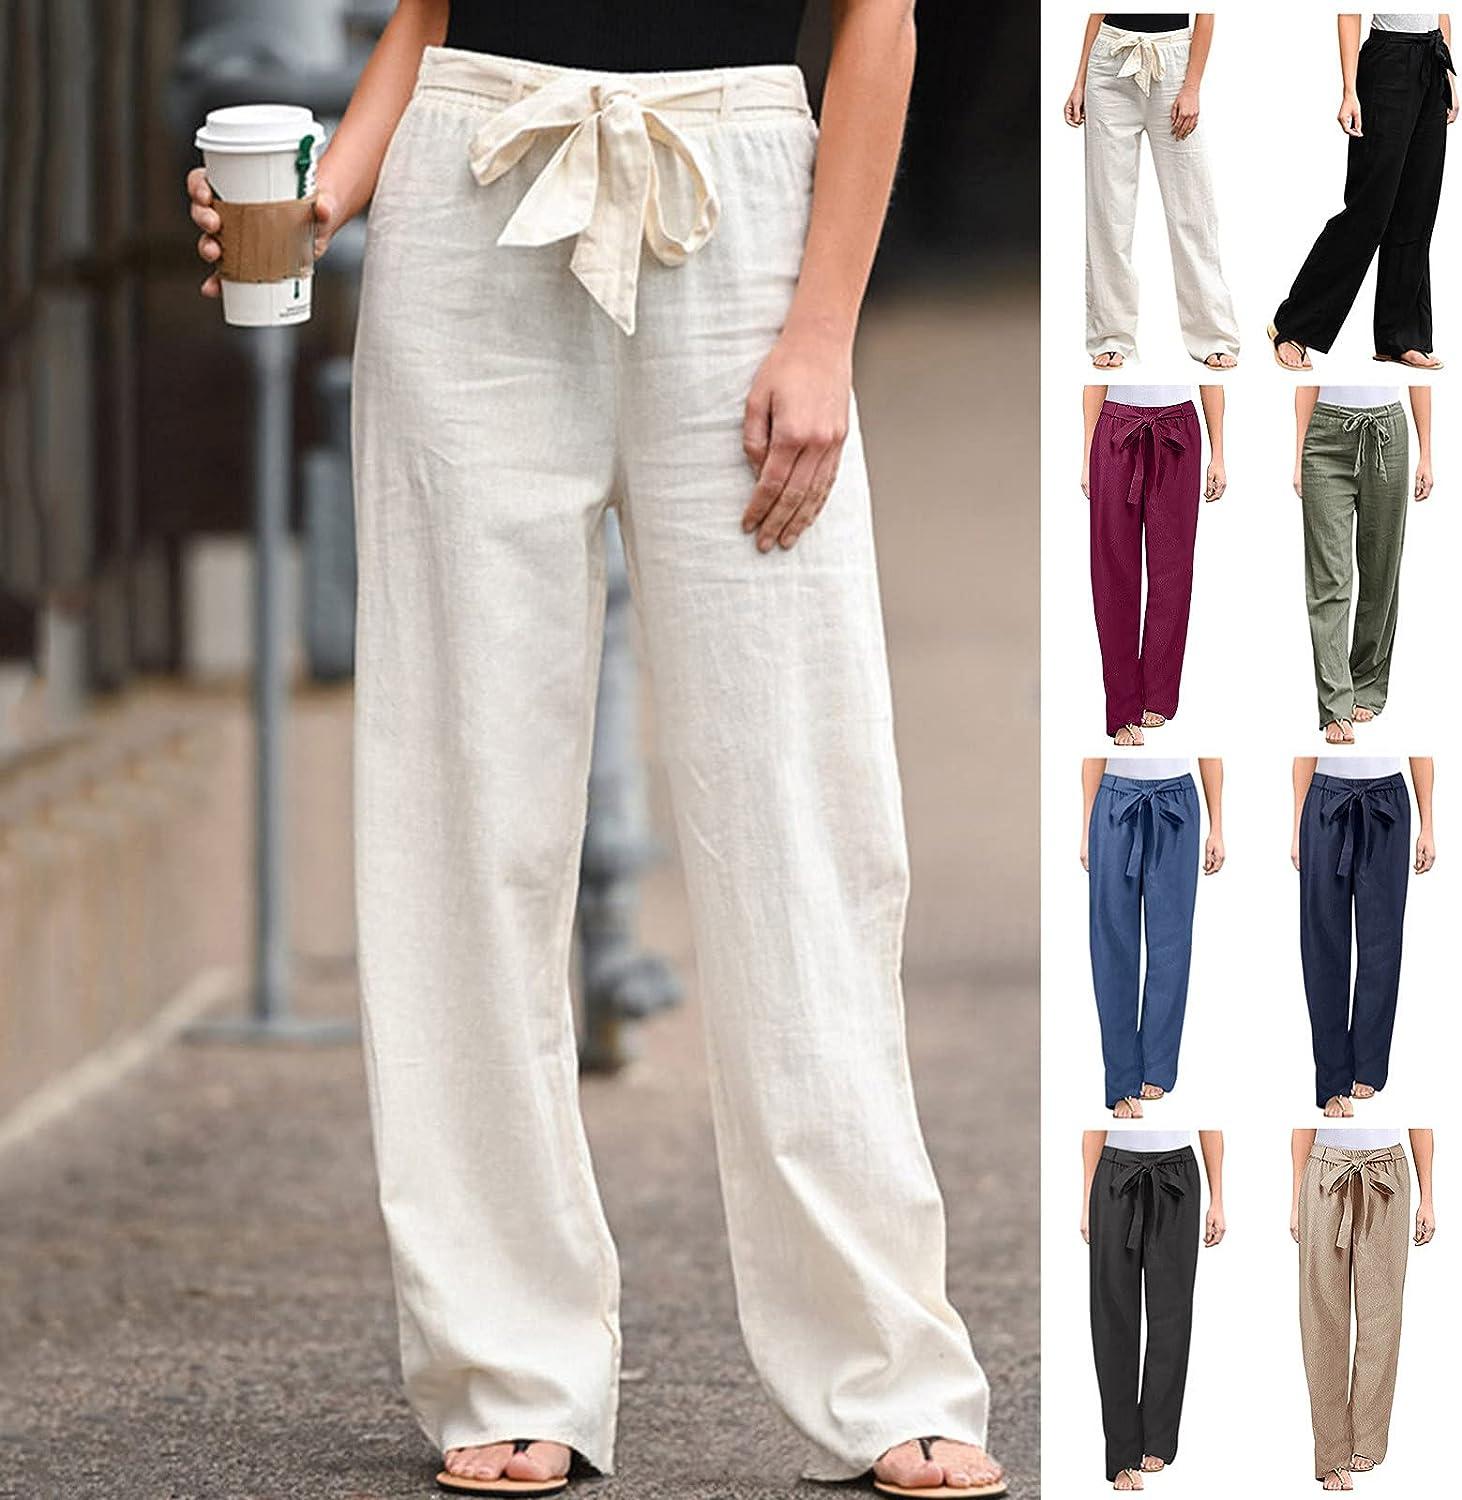 Linen Pants for Women Summer Casual Smocked High Waist Palazzo